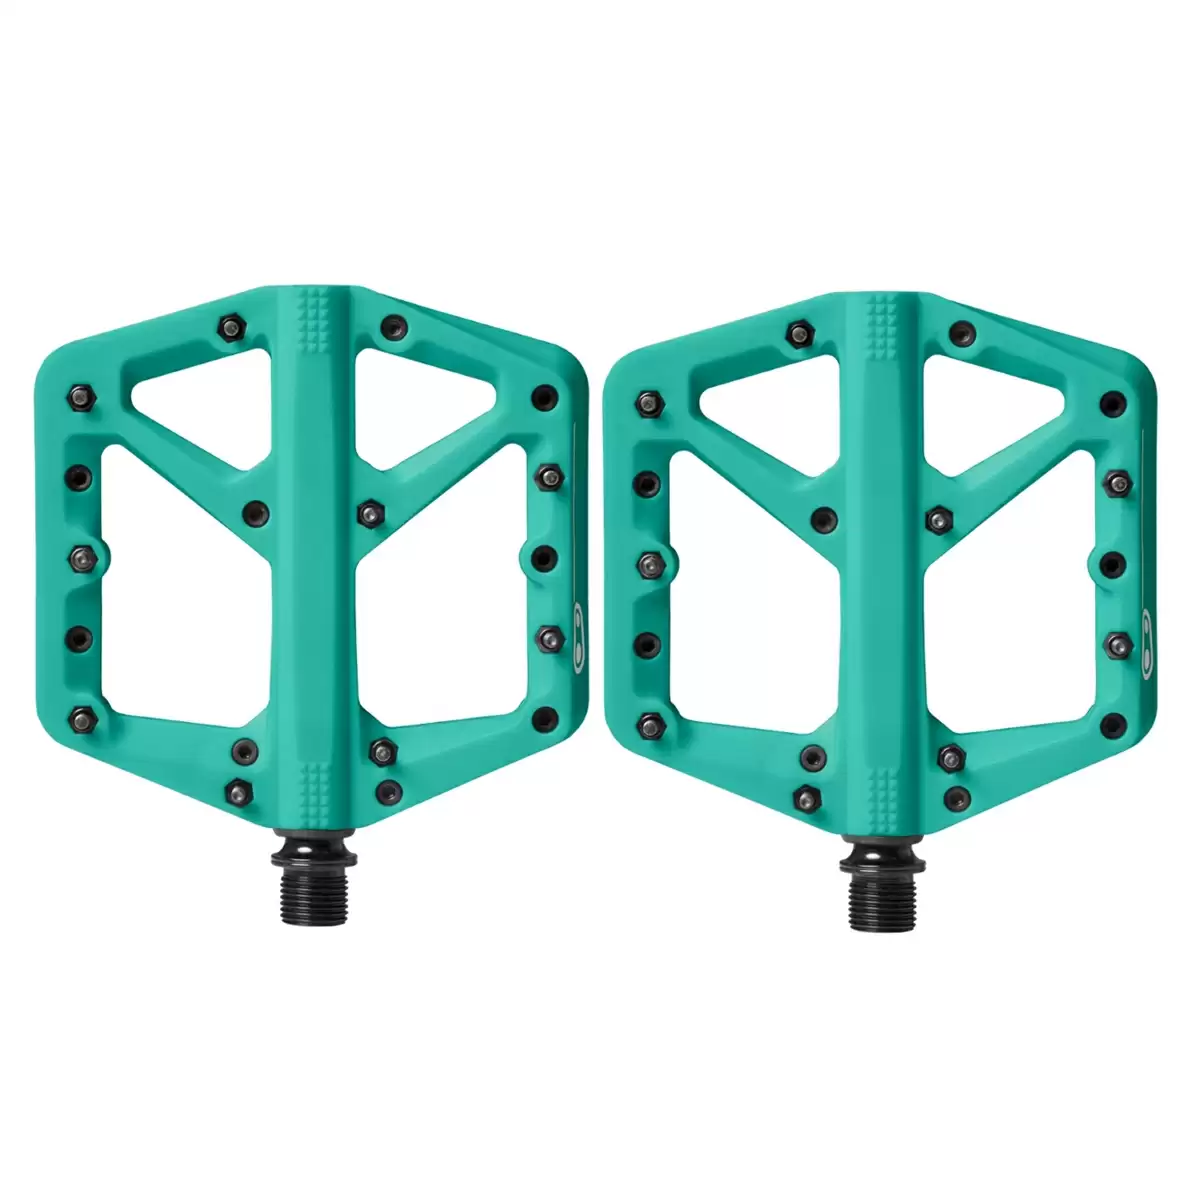 Pair of pedals Stamp 1 Large turquoise - image